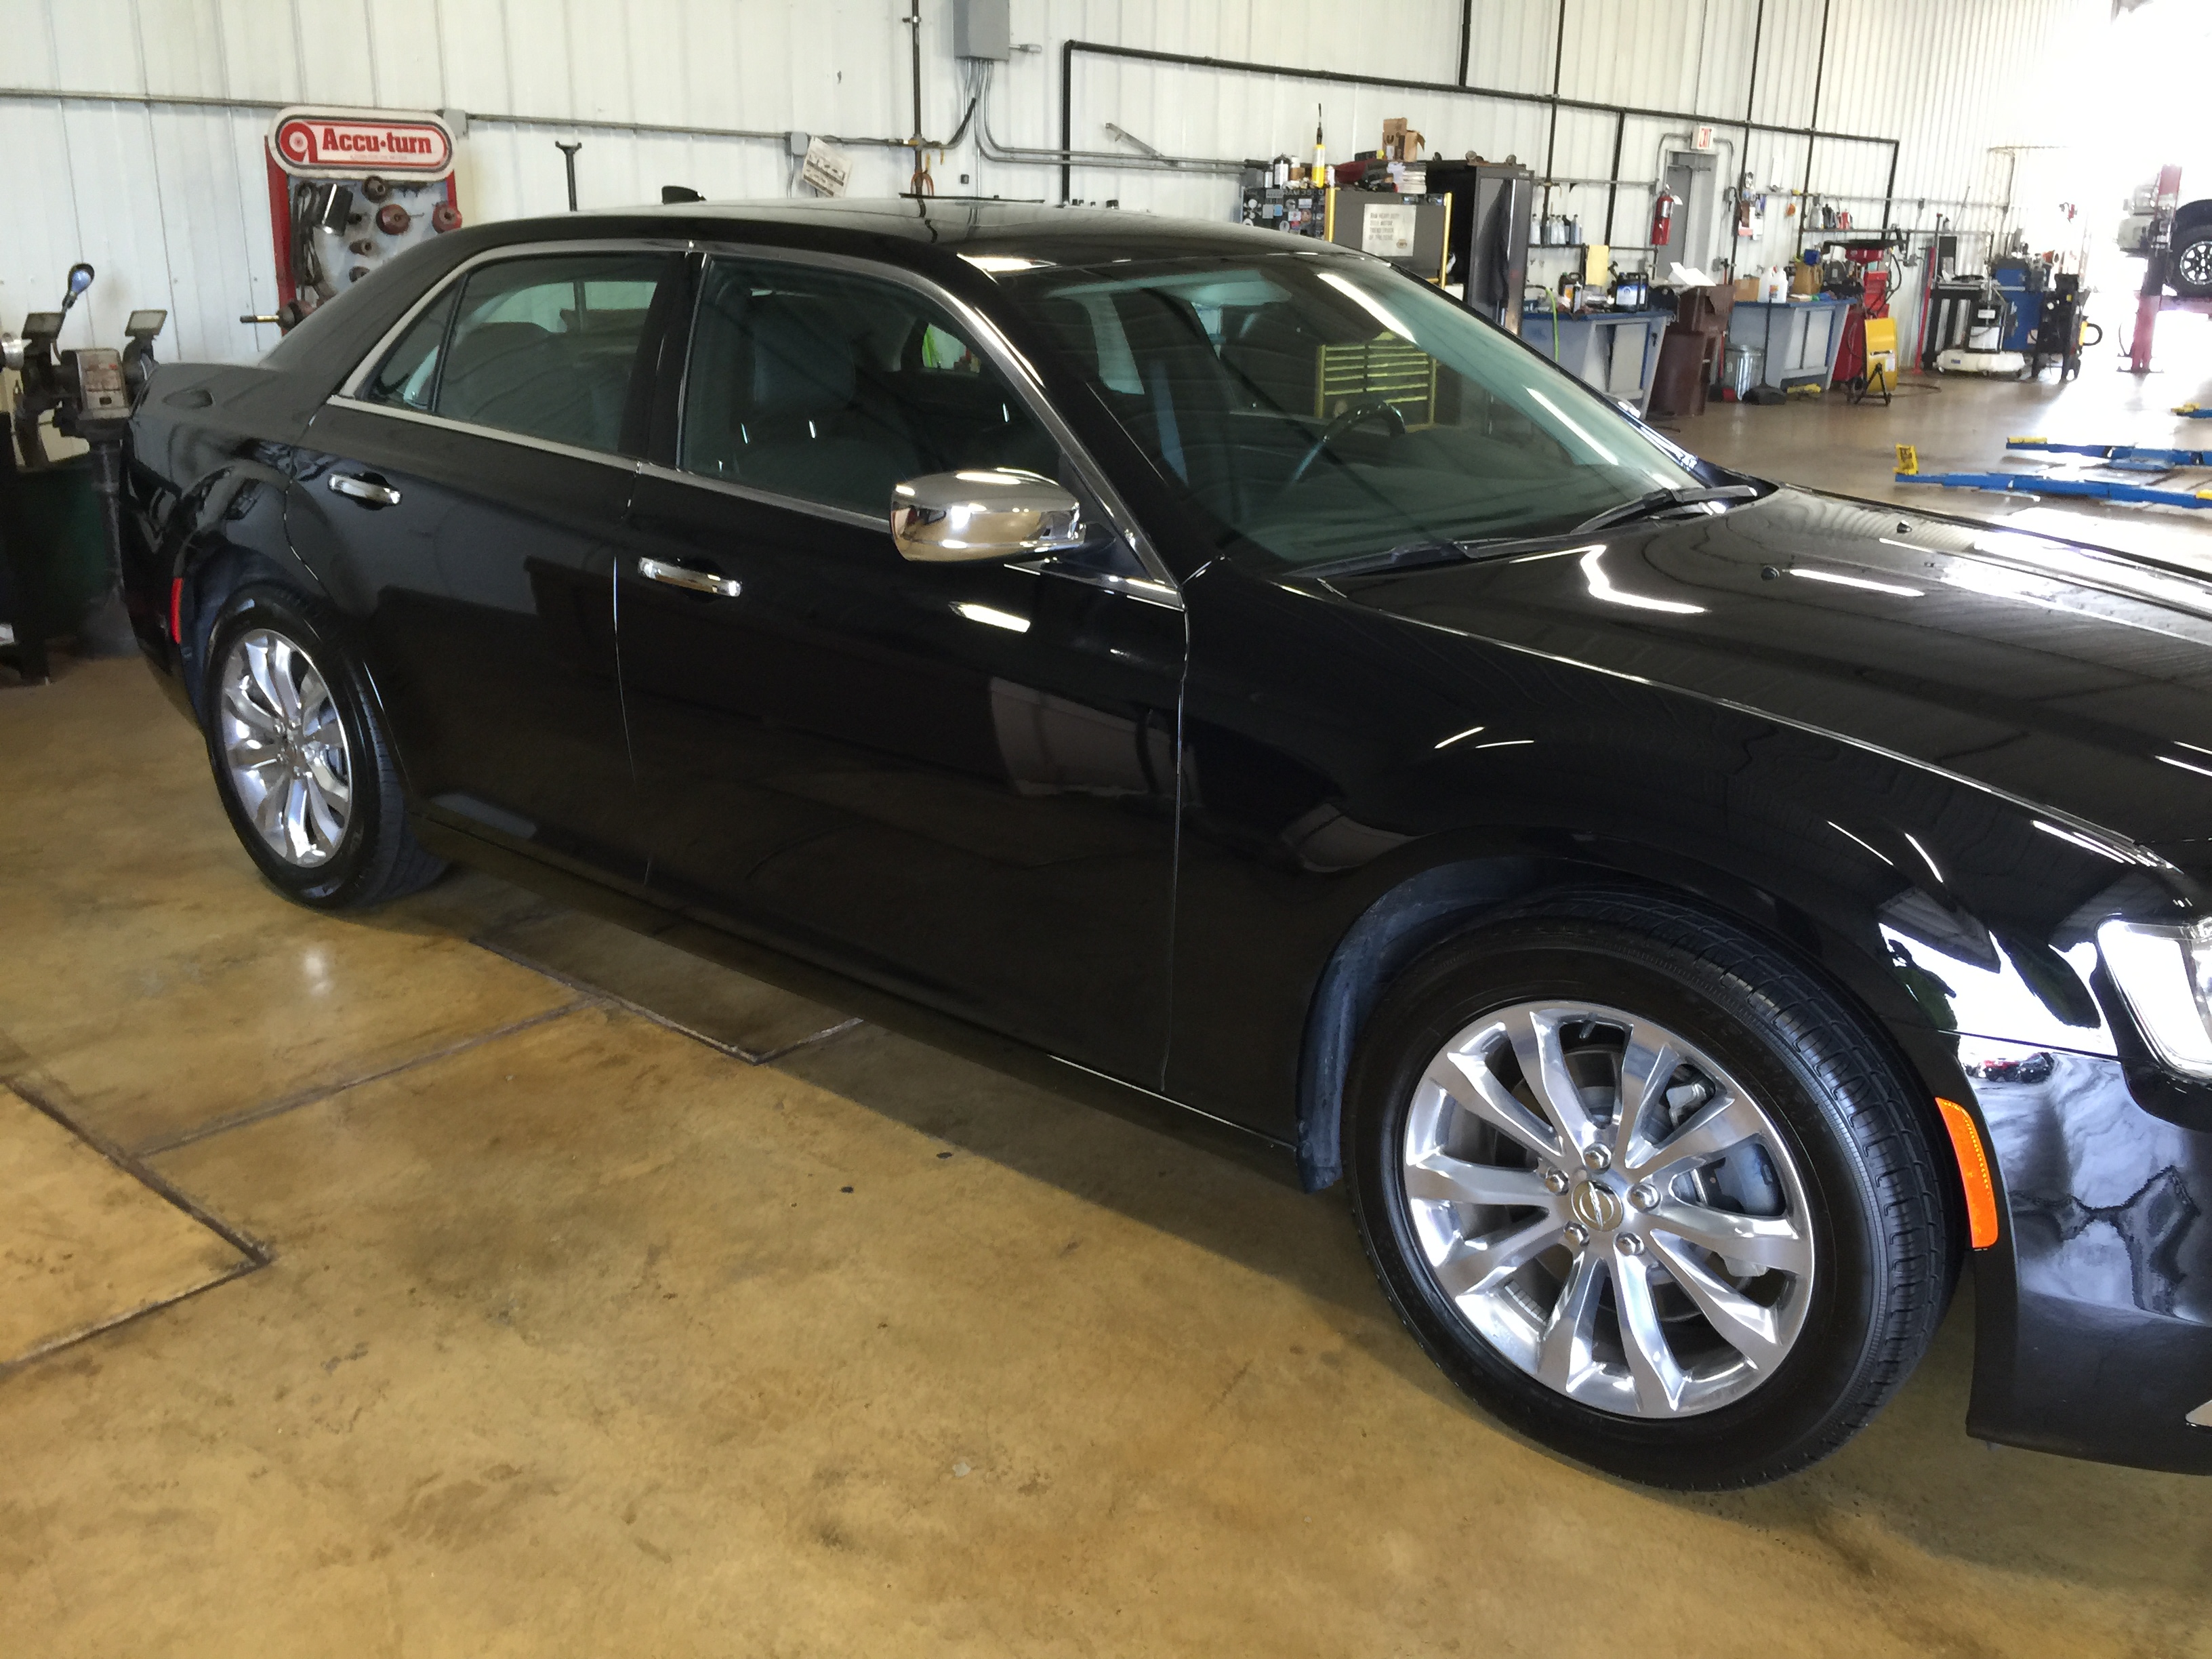 2016 Chrysler 300 C dent removal on drivers side rear door, Springfield IL, http://217dent.com